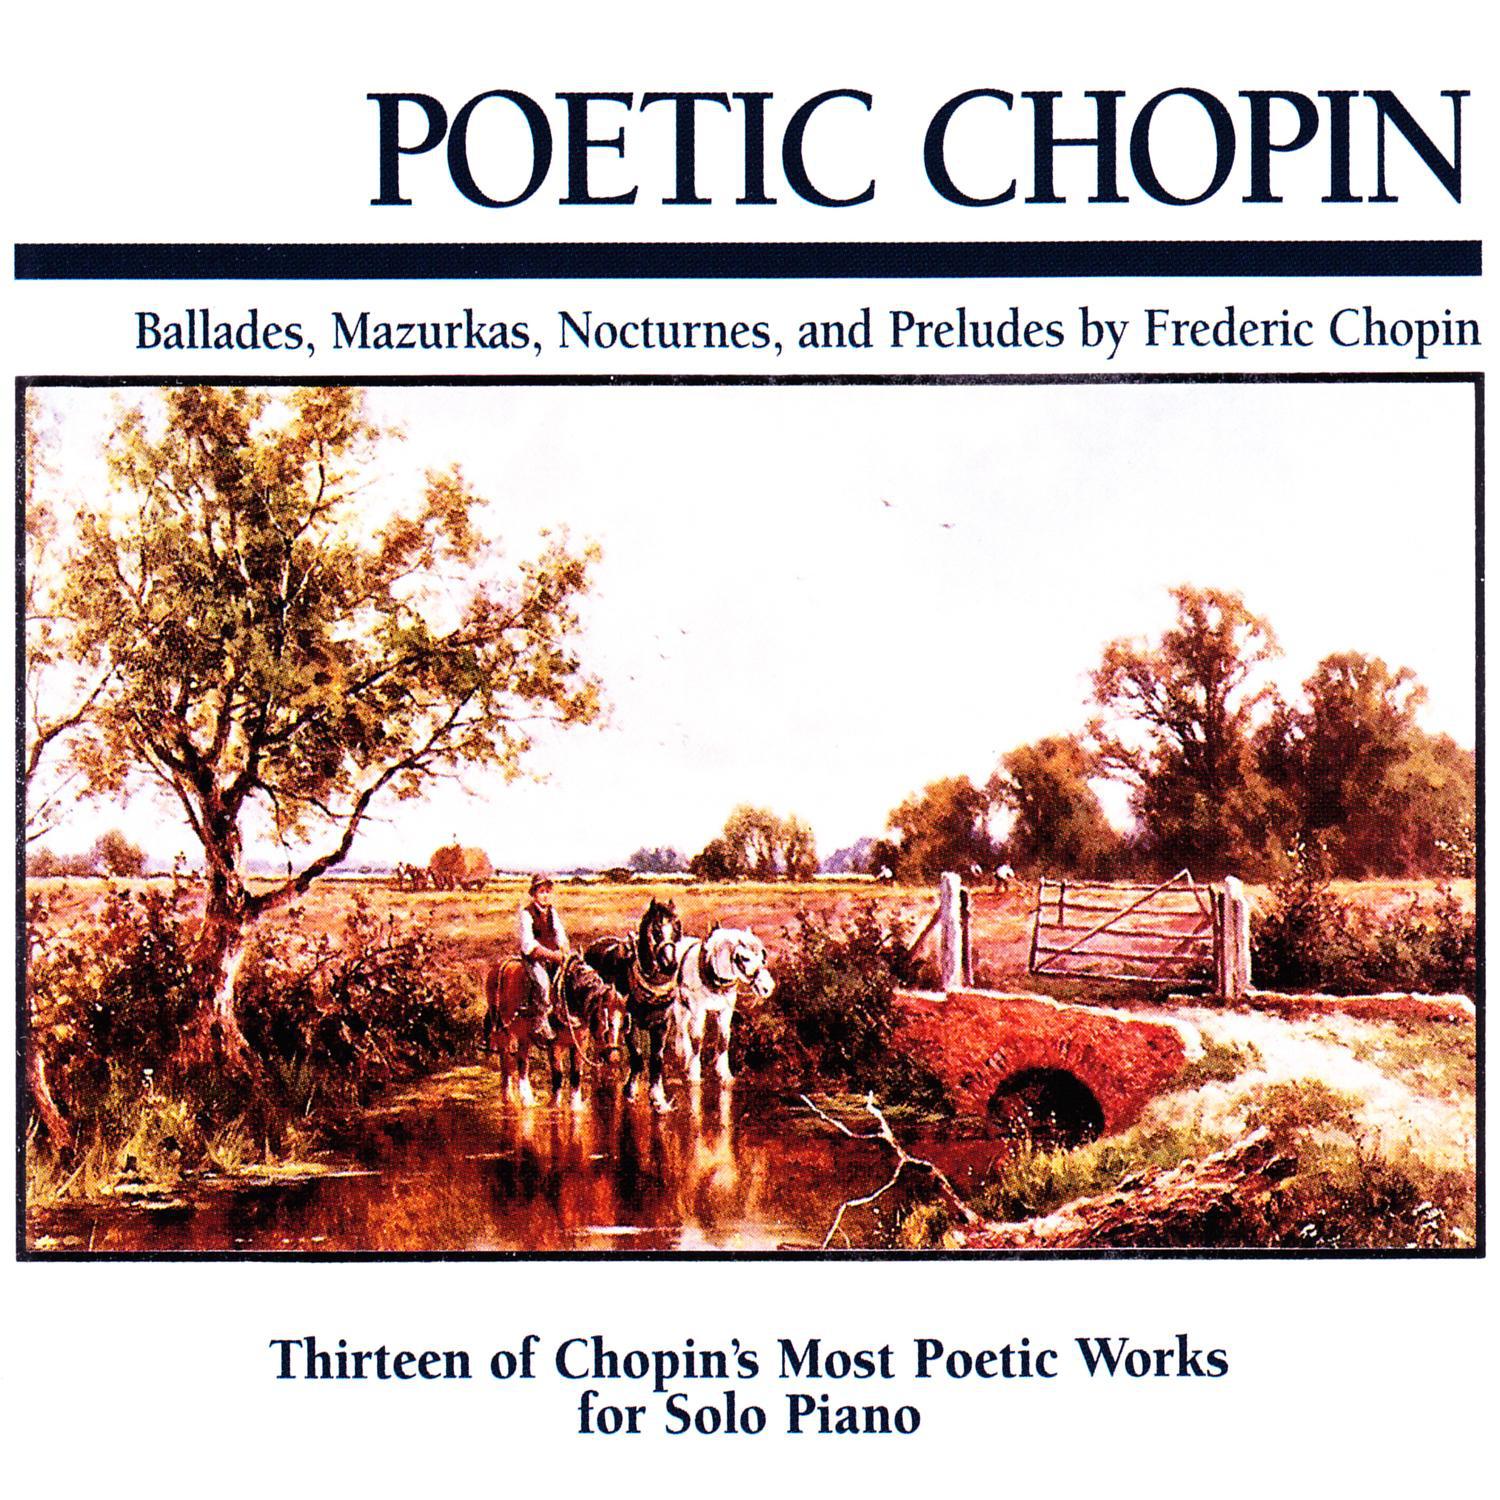 Poetic Chopin: Ballades, Mazurkas, Nocturnes, And Preludes by Fre de ric Chopin